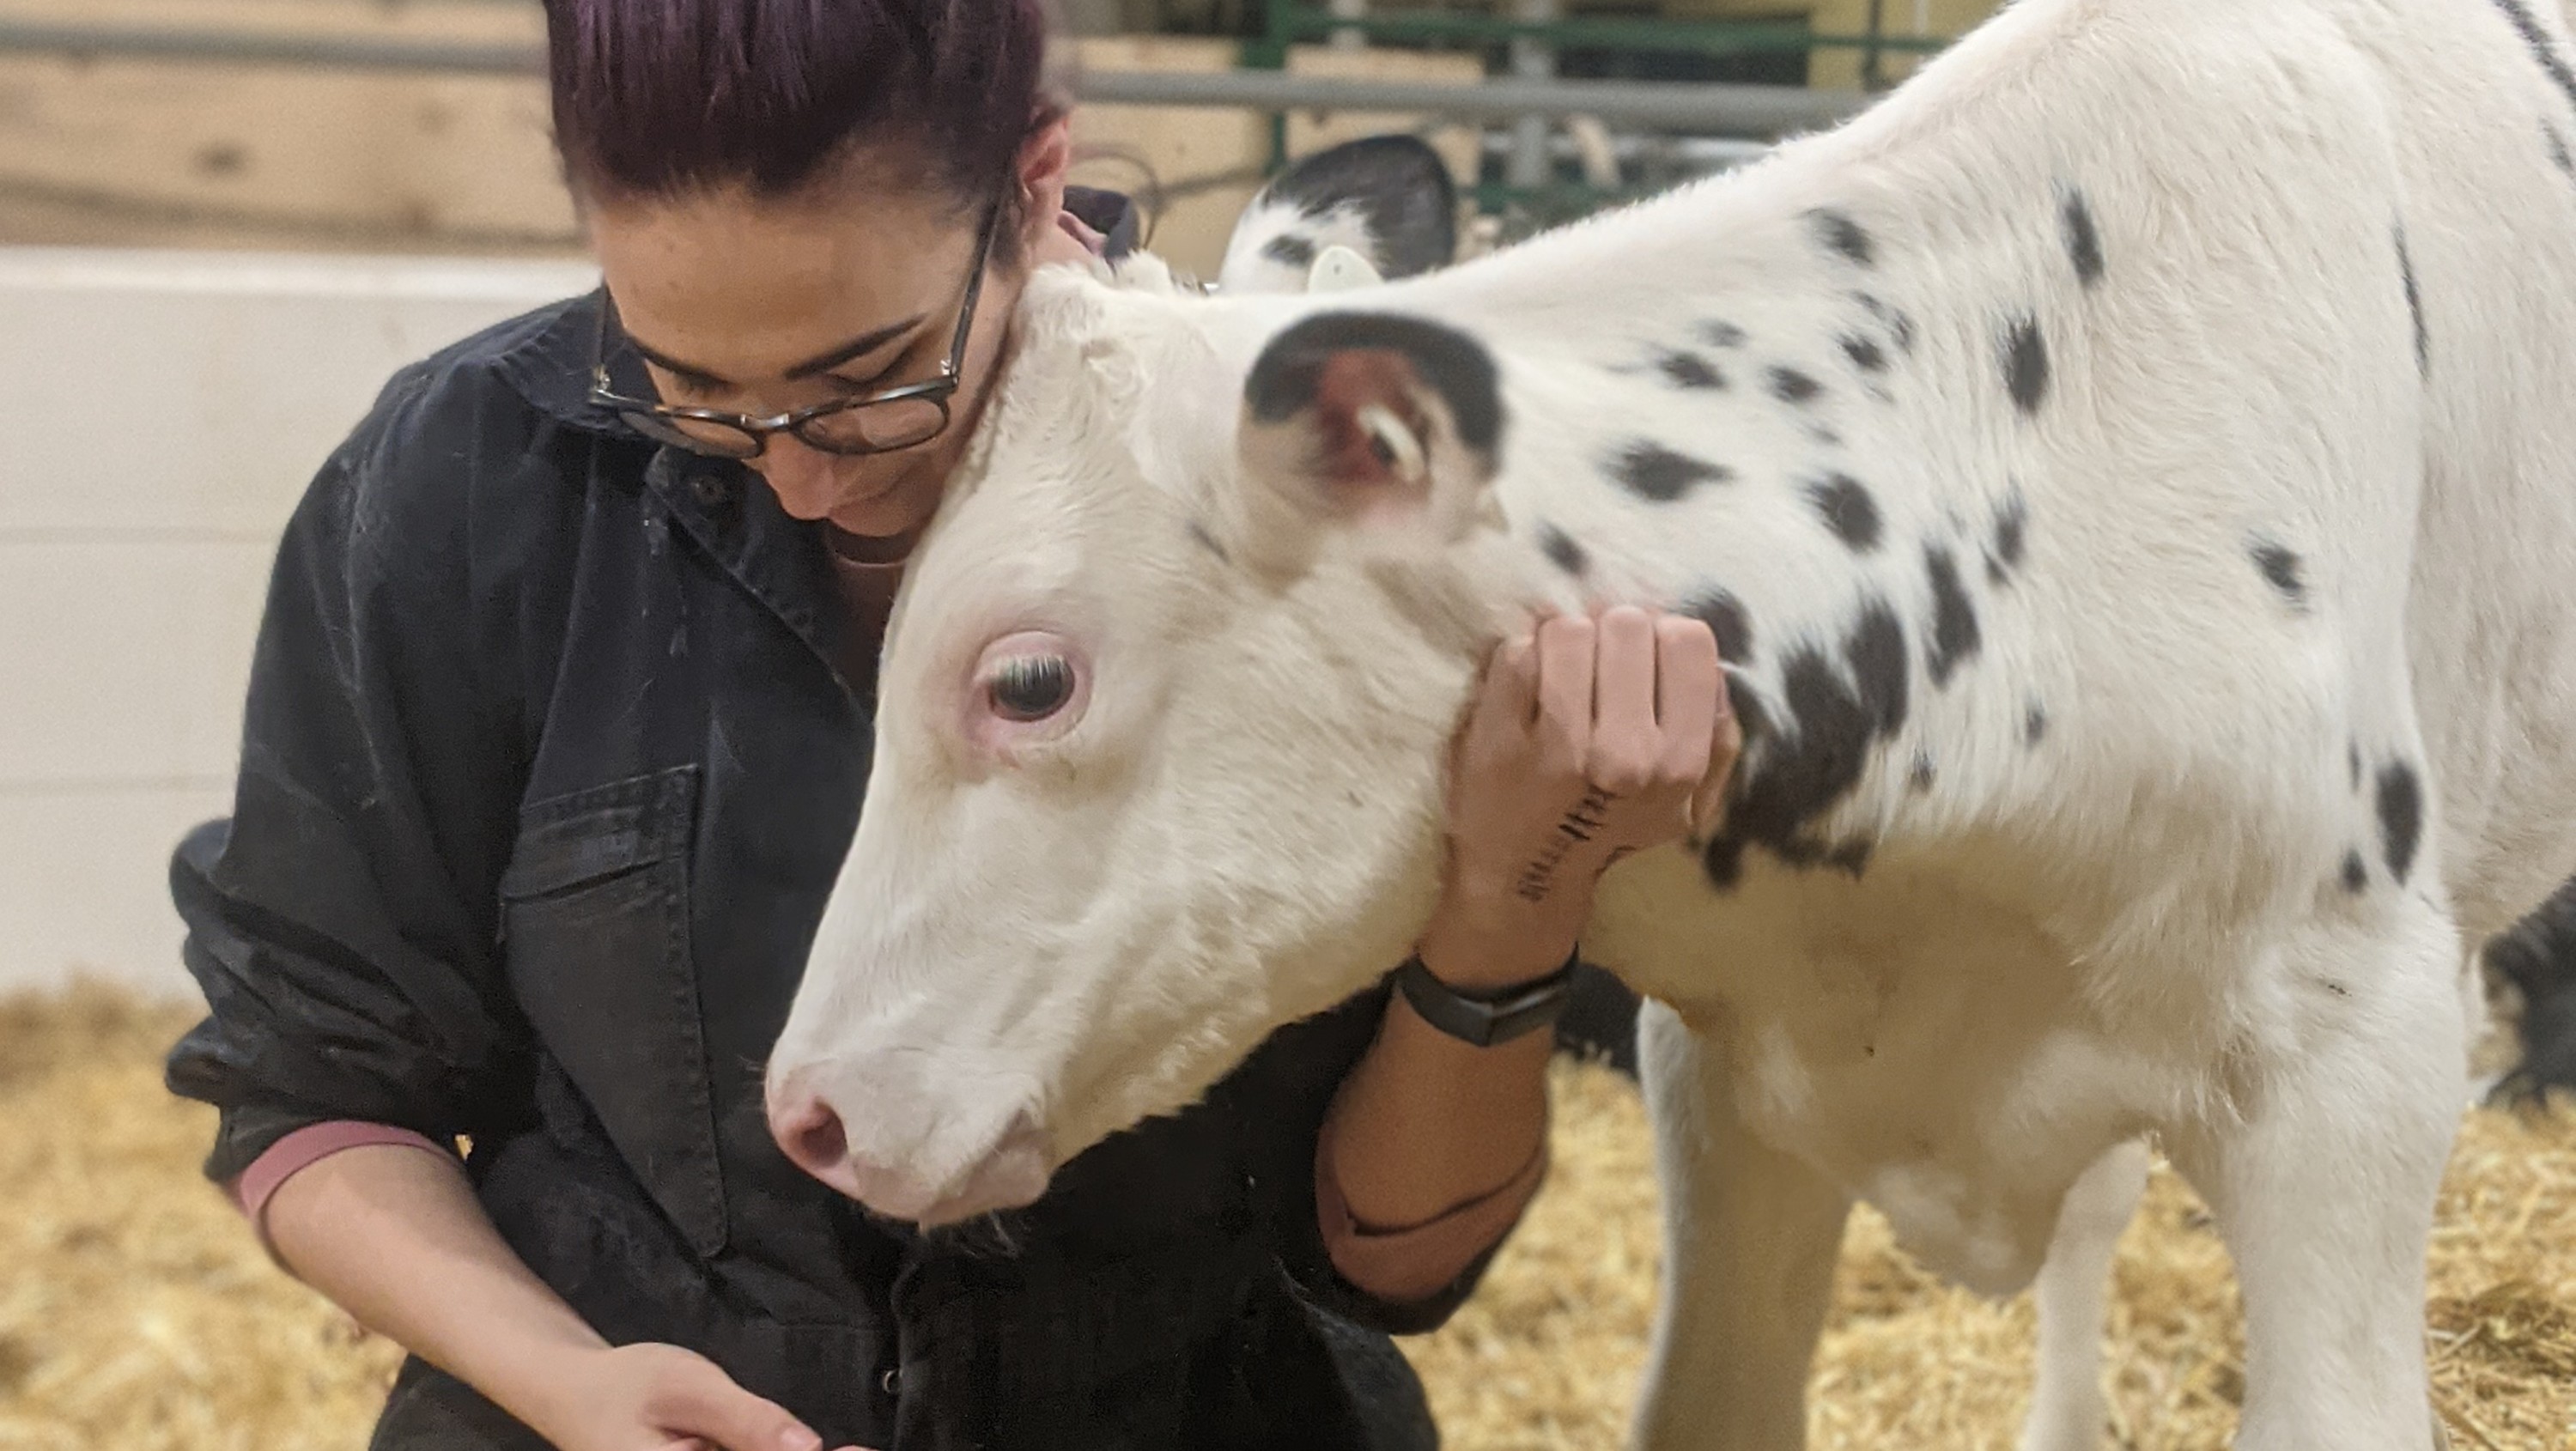 Newborn dairy calves fed probiotic were healthier in crucial first weeks,  student research shows | Folio